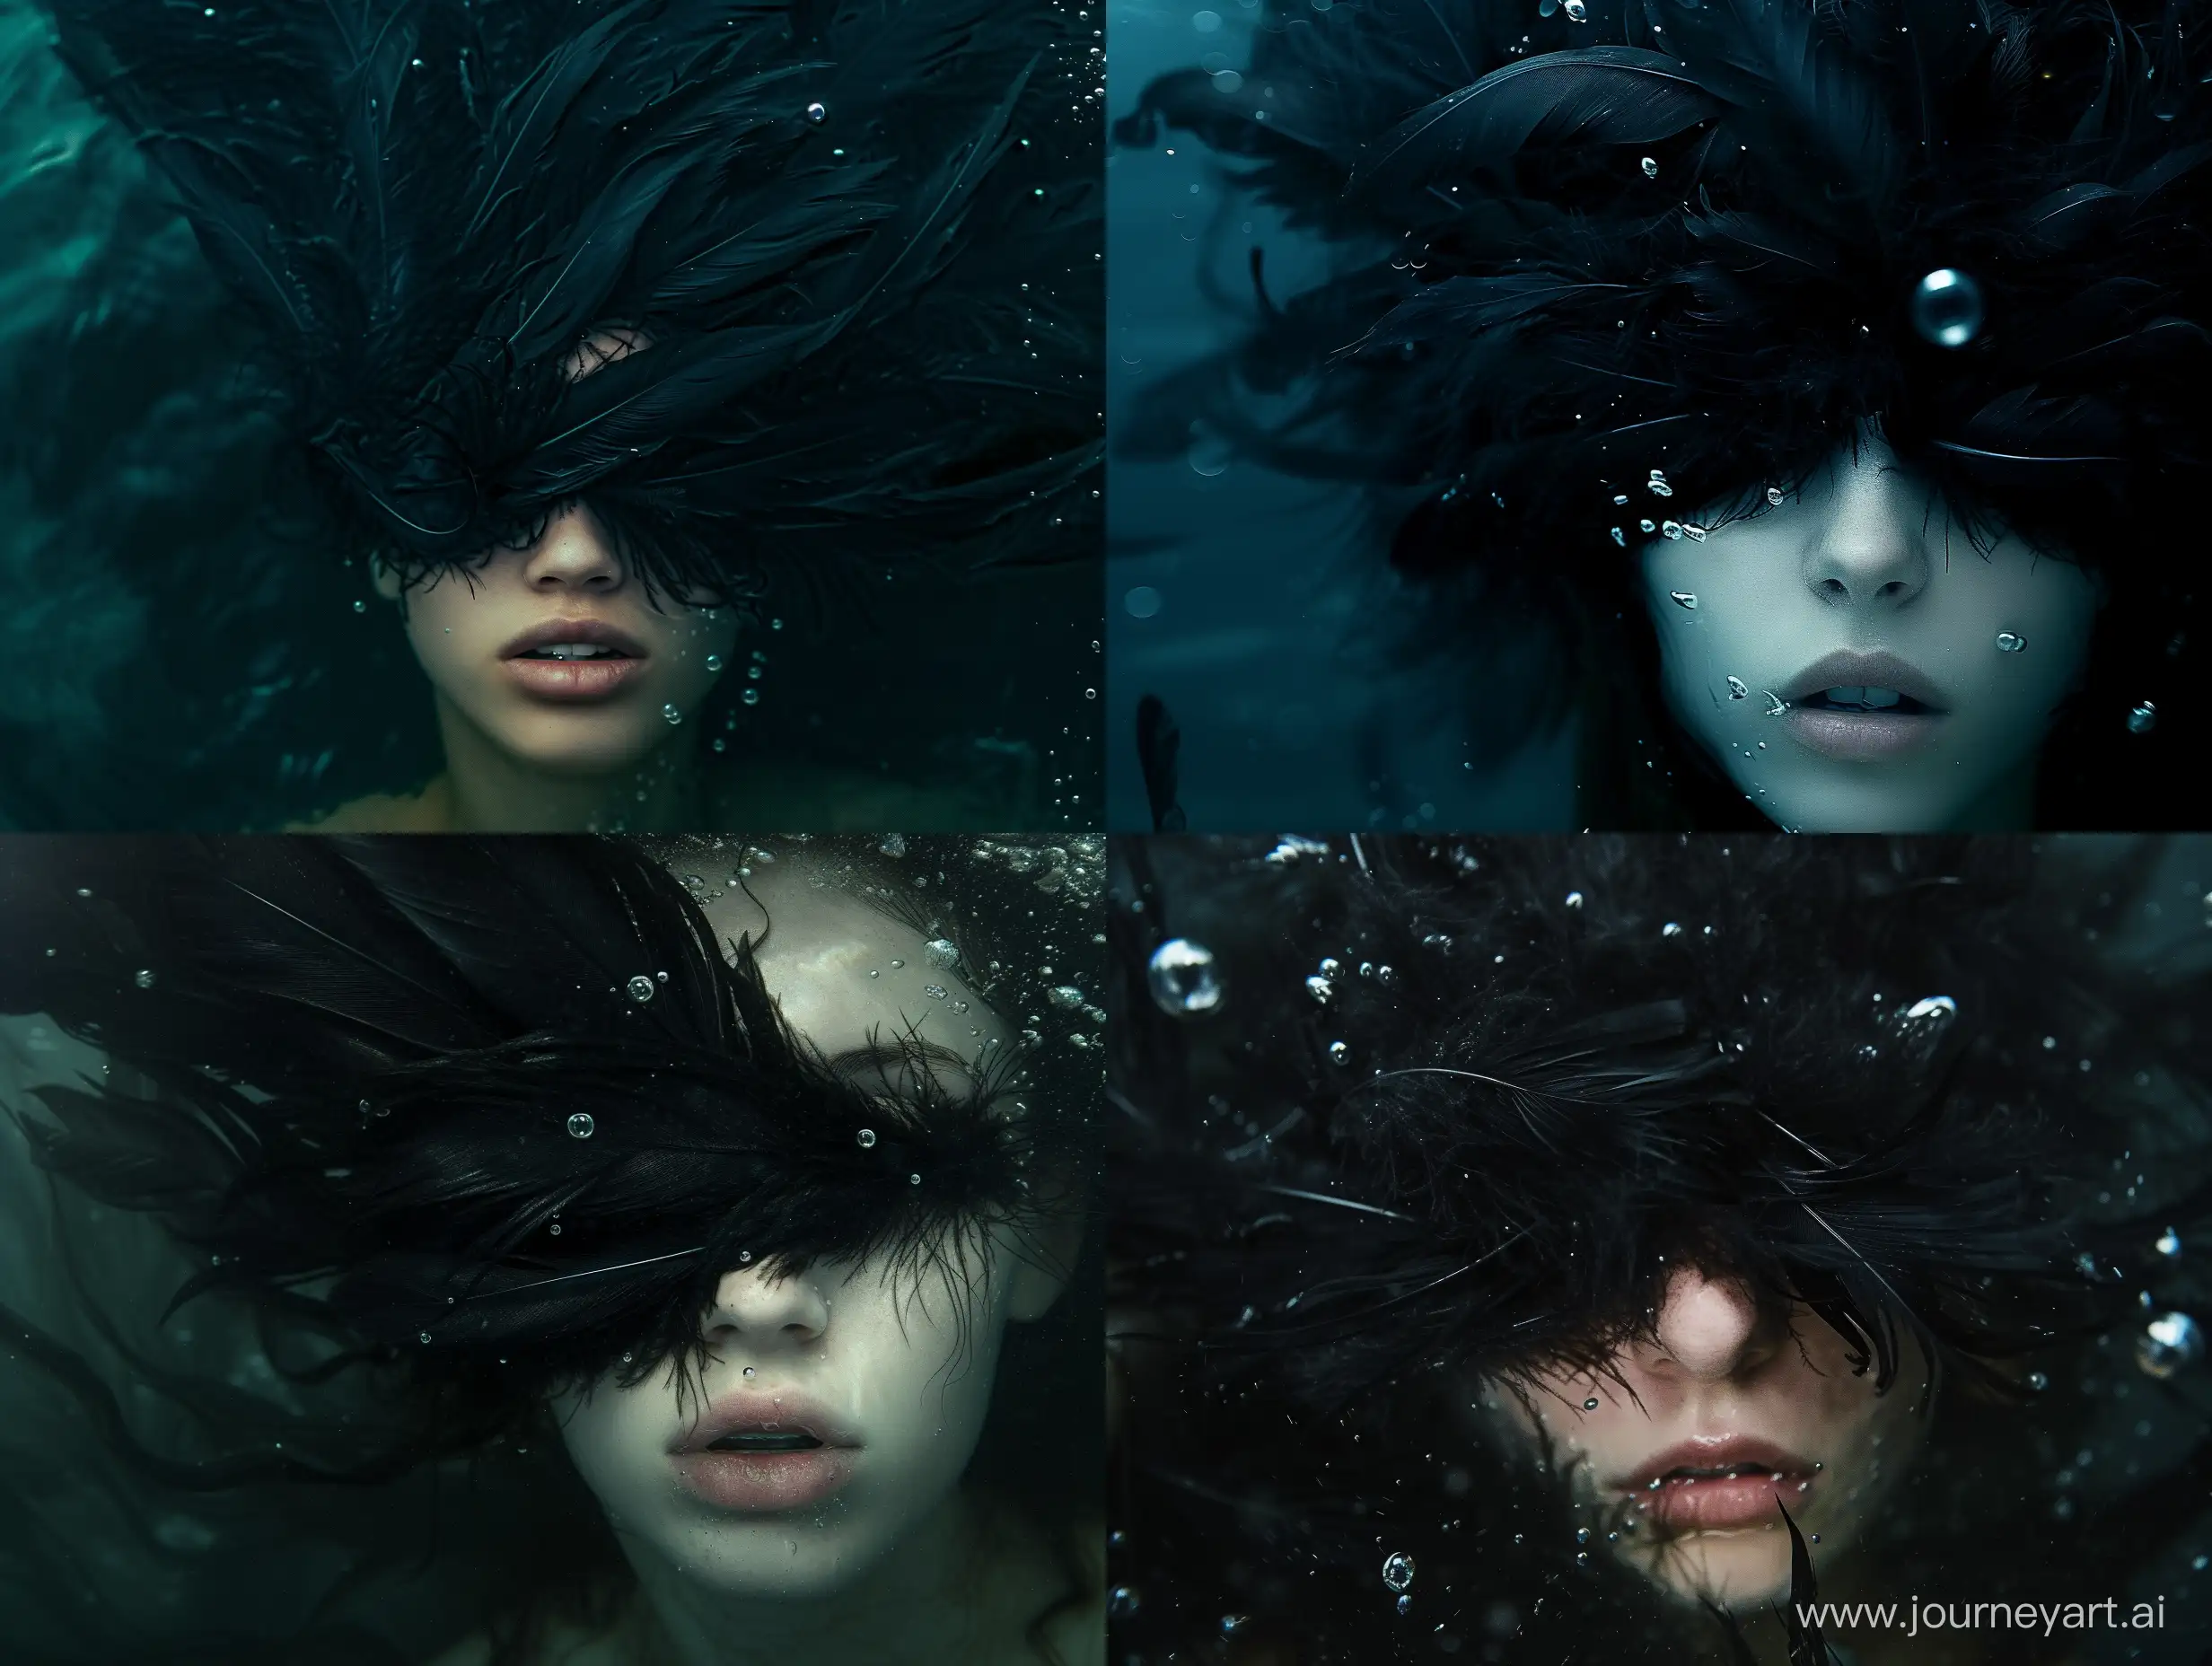 black feathers are covering eyes of the girl under the water, out of her mouth are going air bubbles, dark colors mystical vibe,  